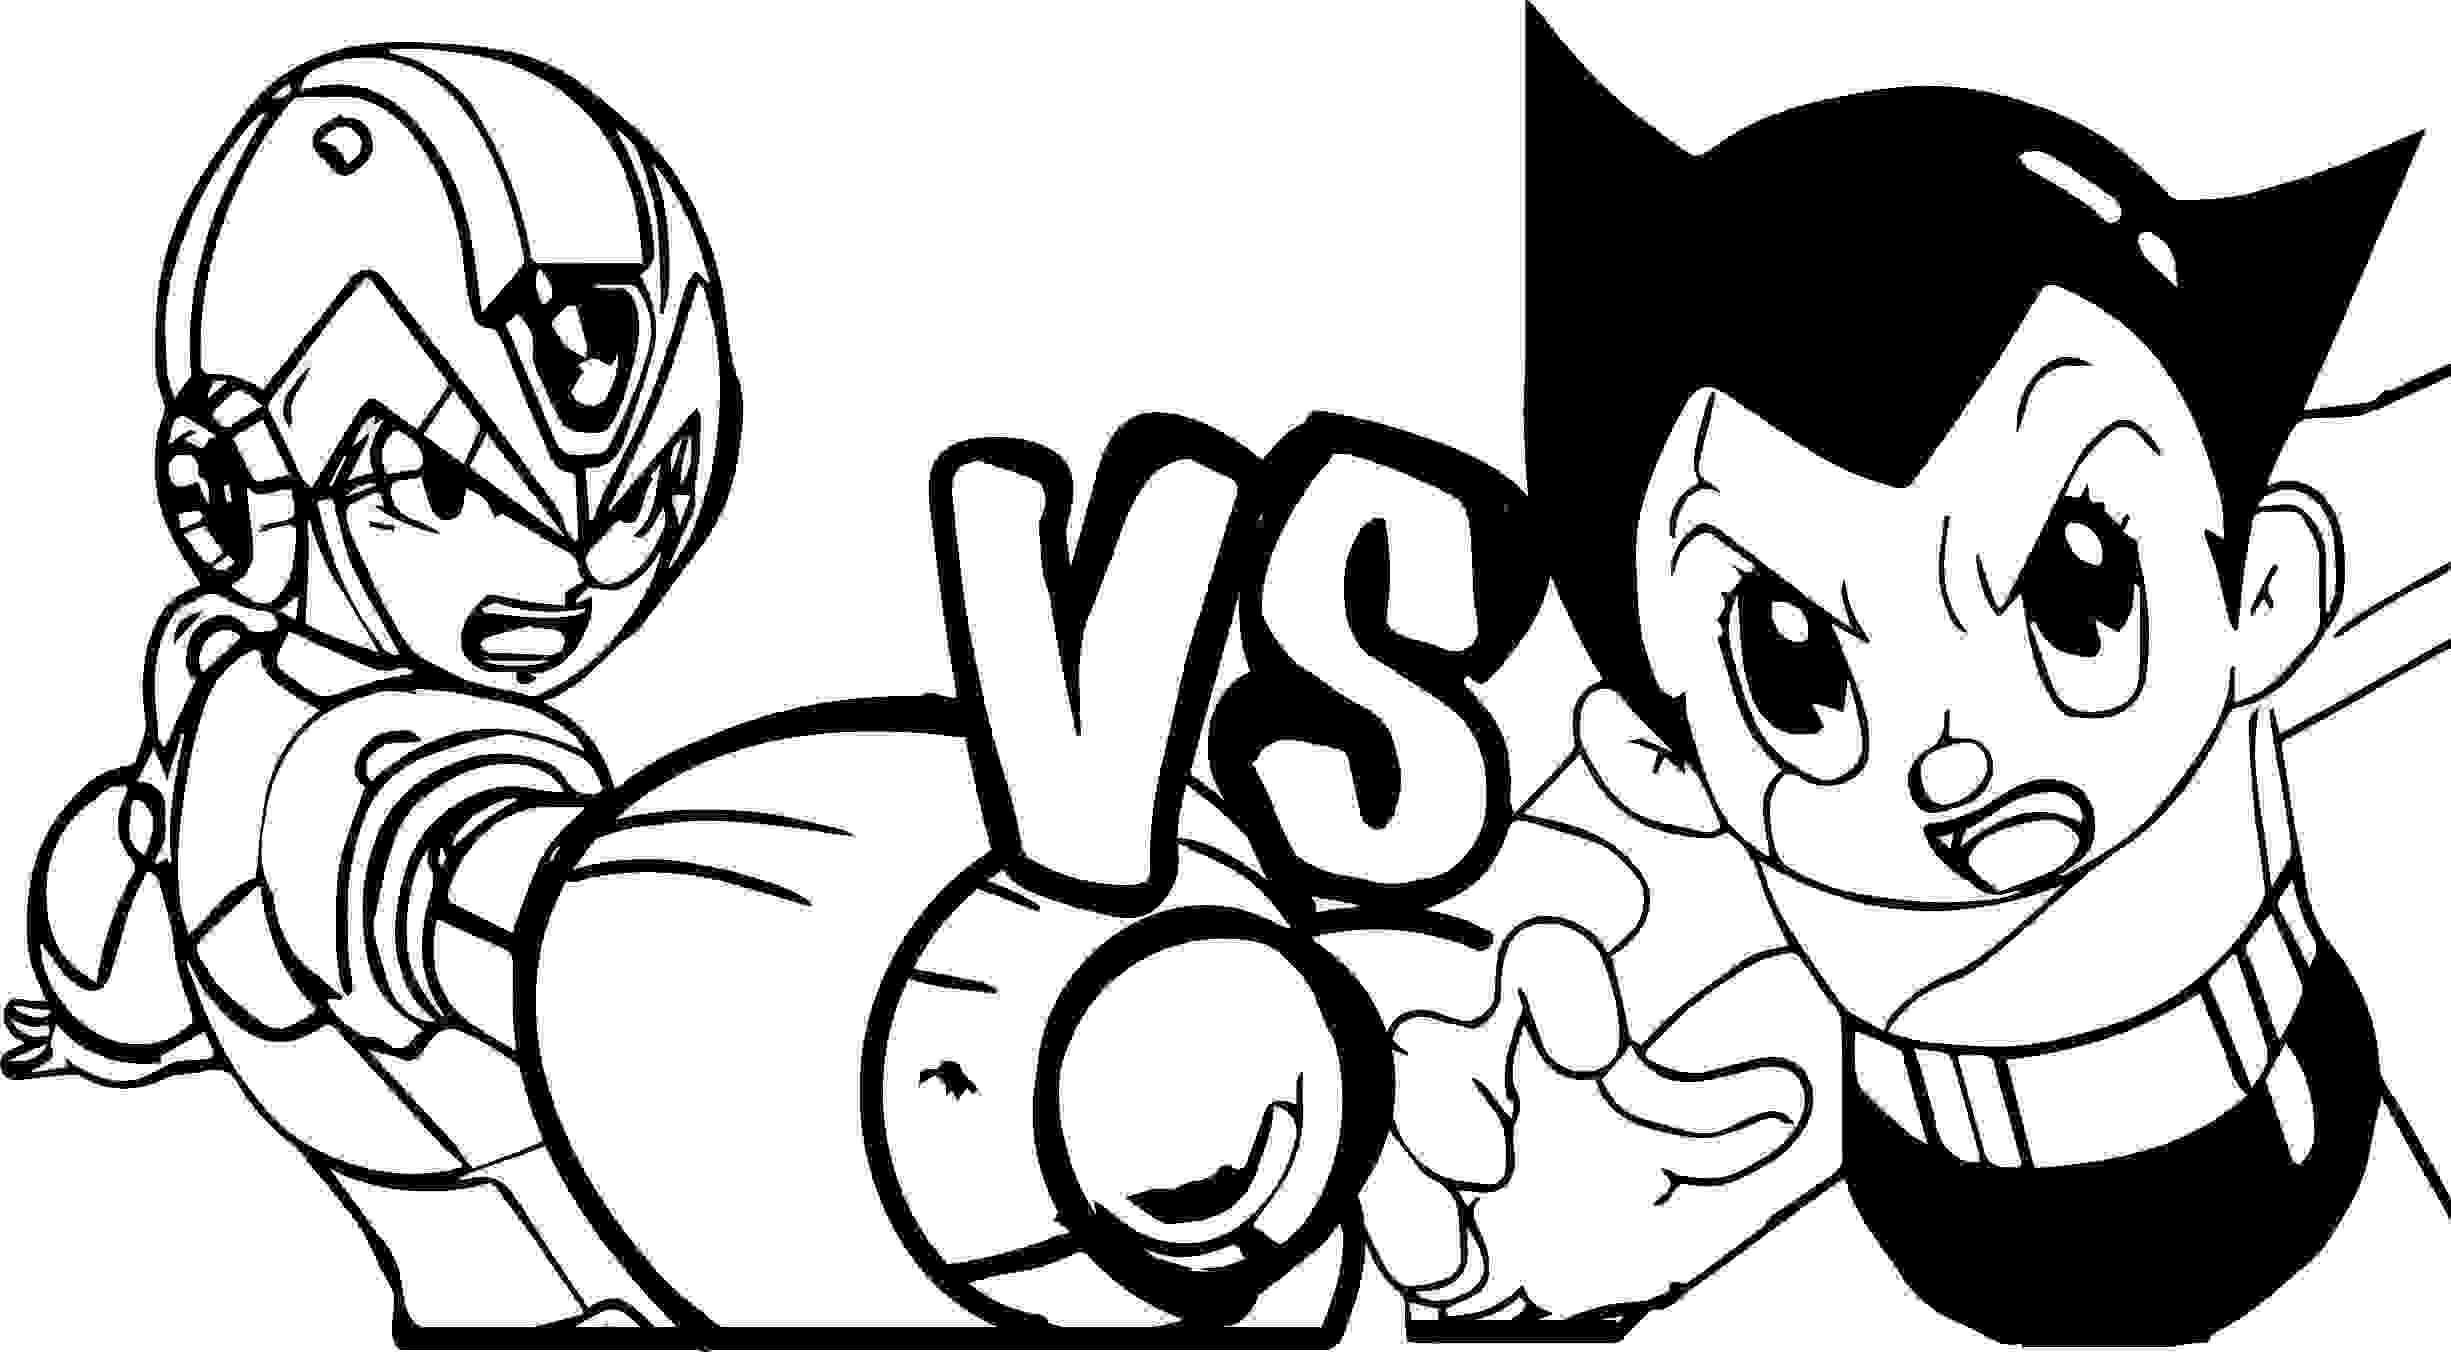 Astro Boy fights to Electro Boy Coloring Pages